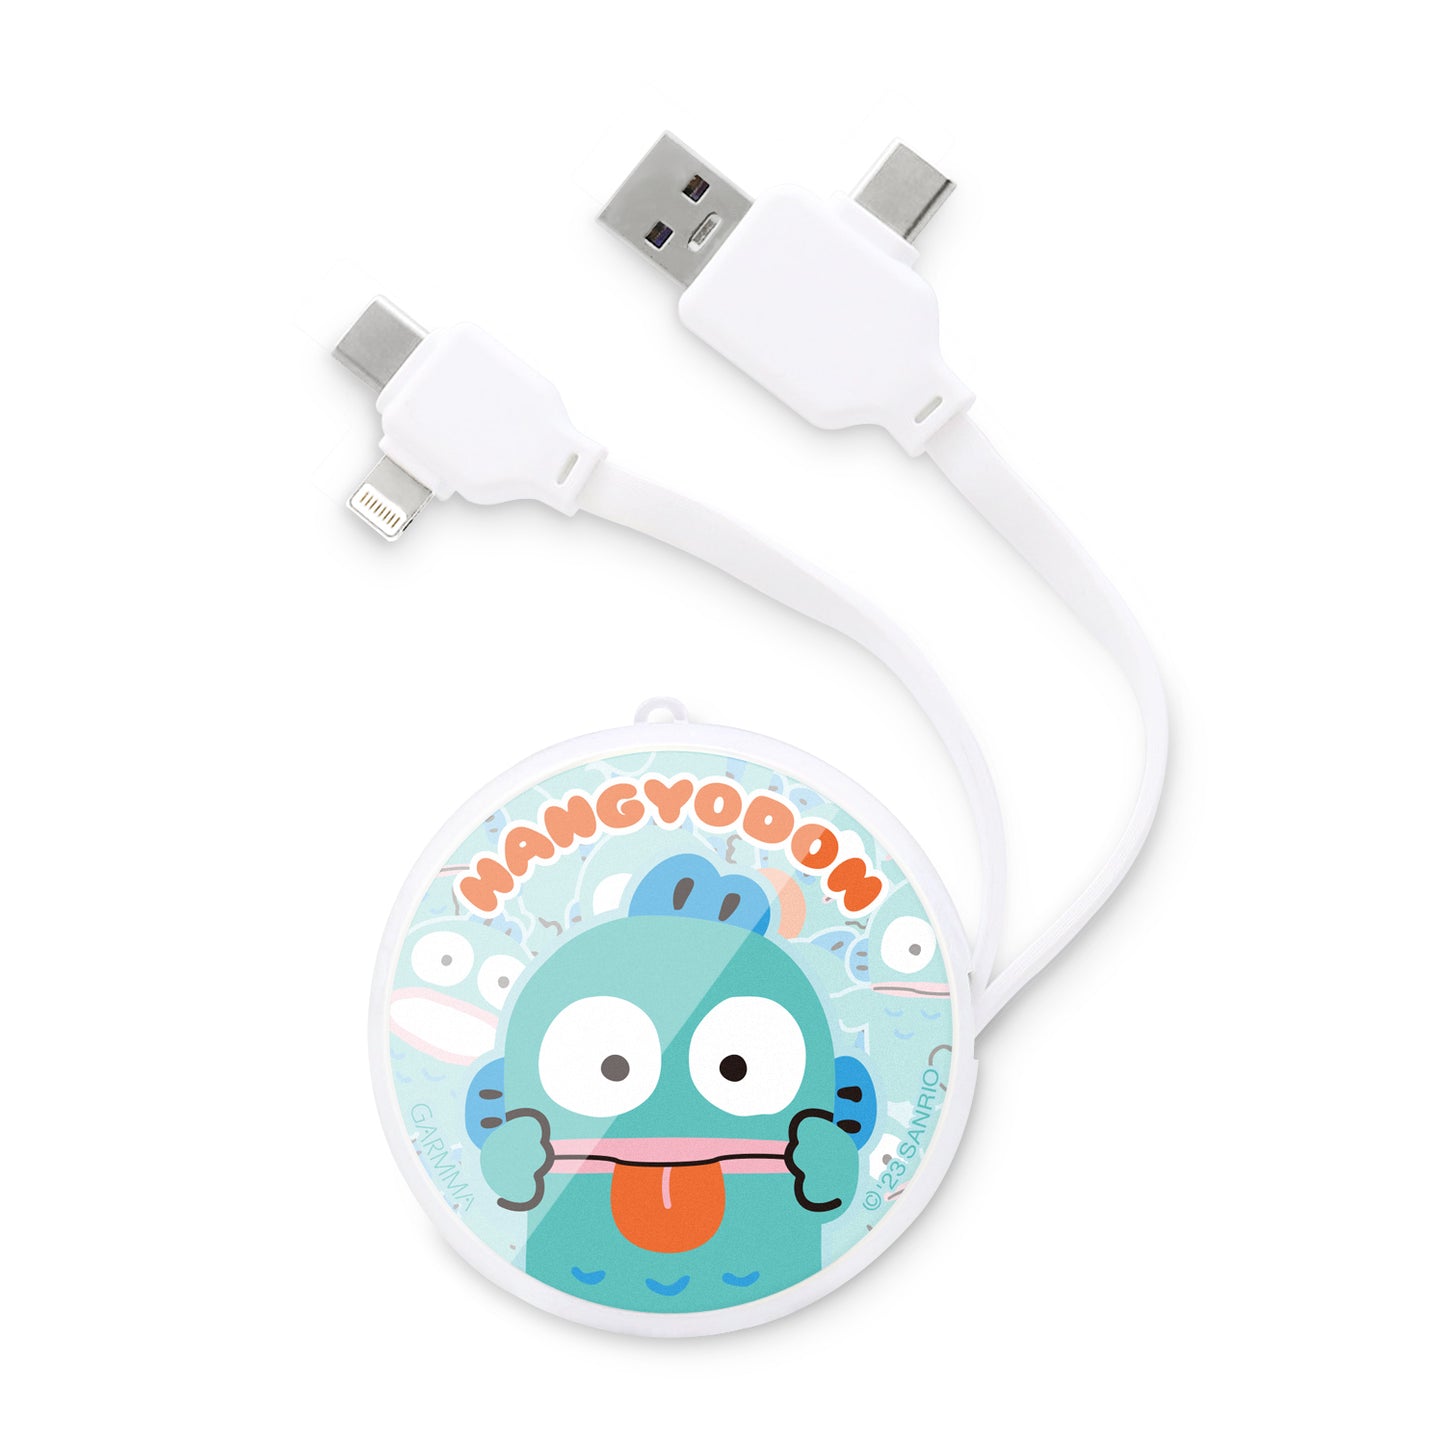 GARMMA Sanrio Characters PD Fast Charge Lightning+Type-C Extracted Extension Cable